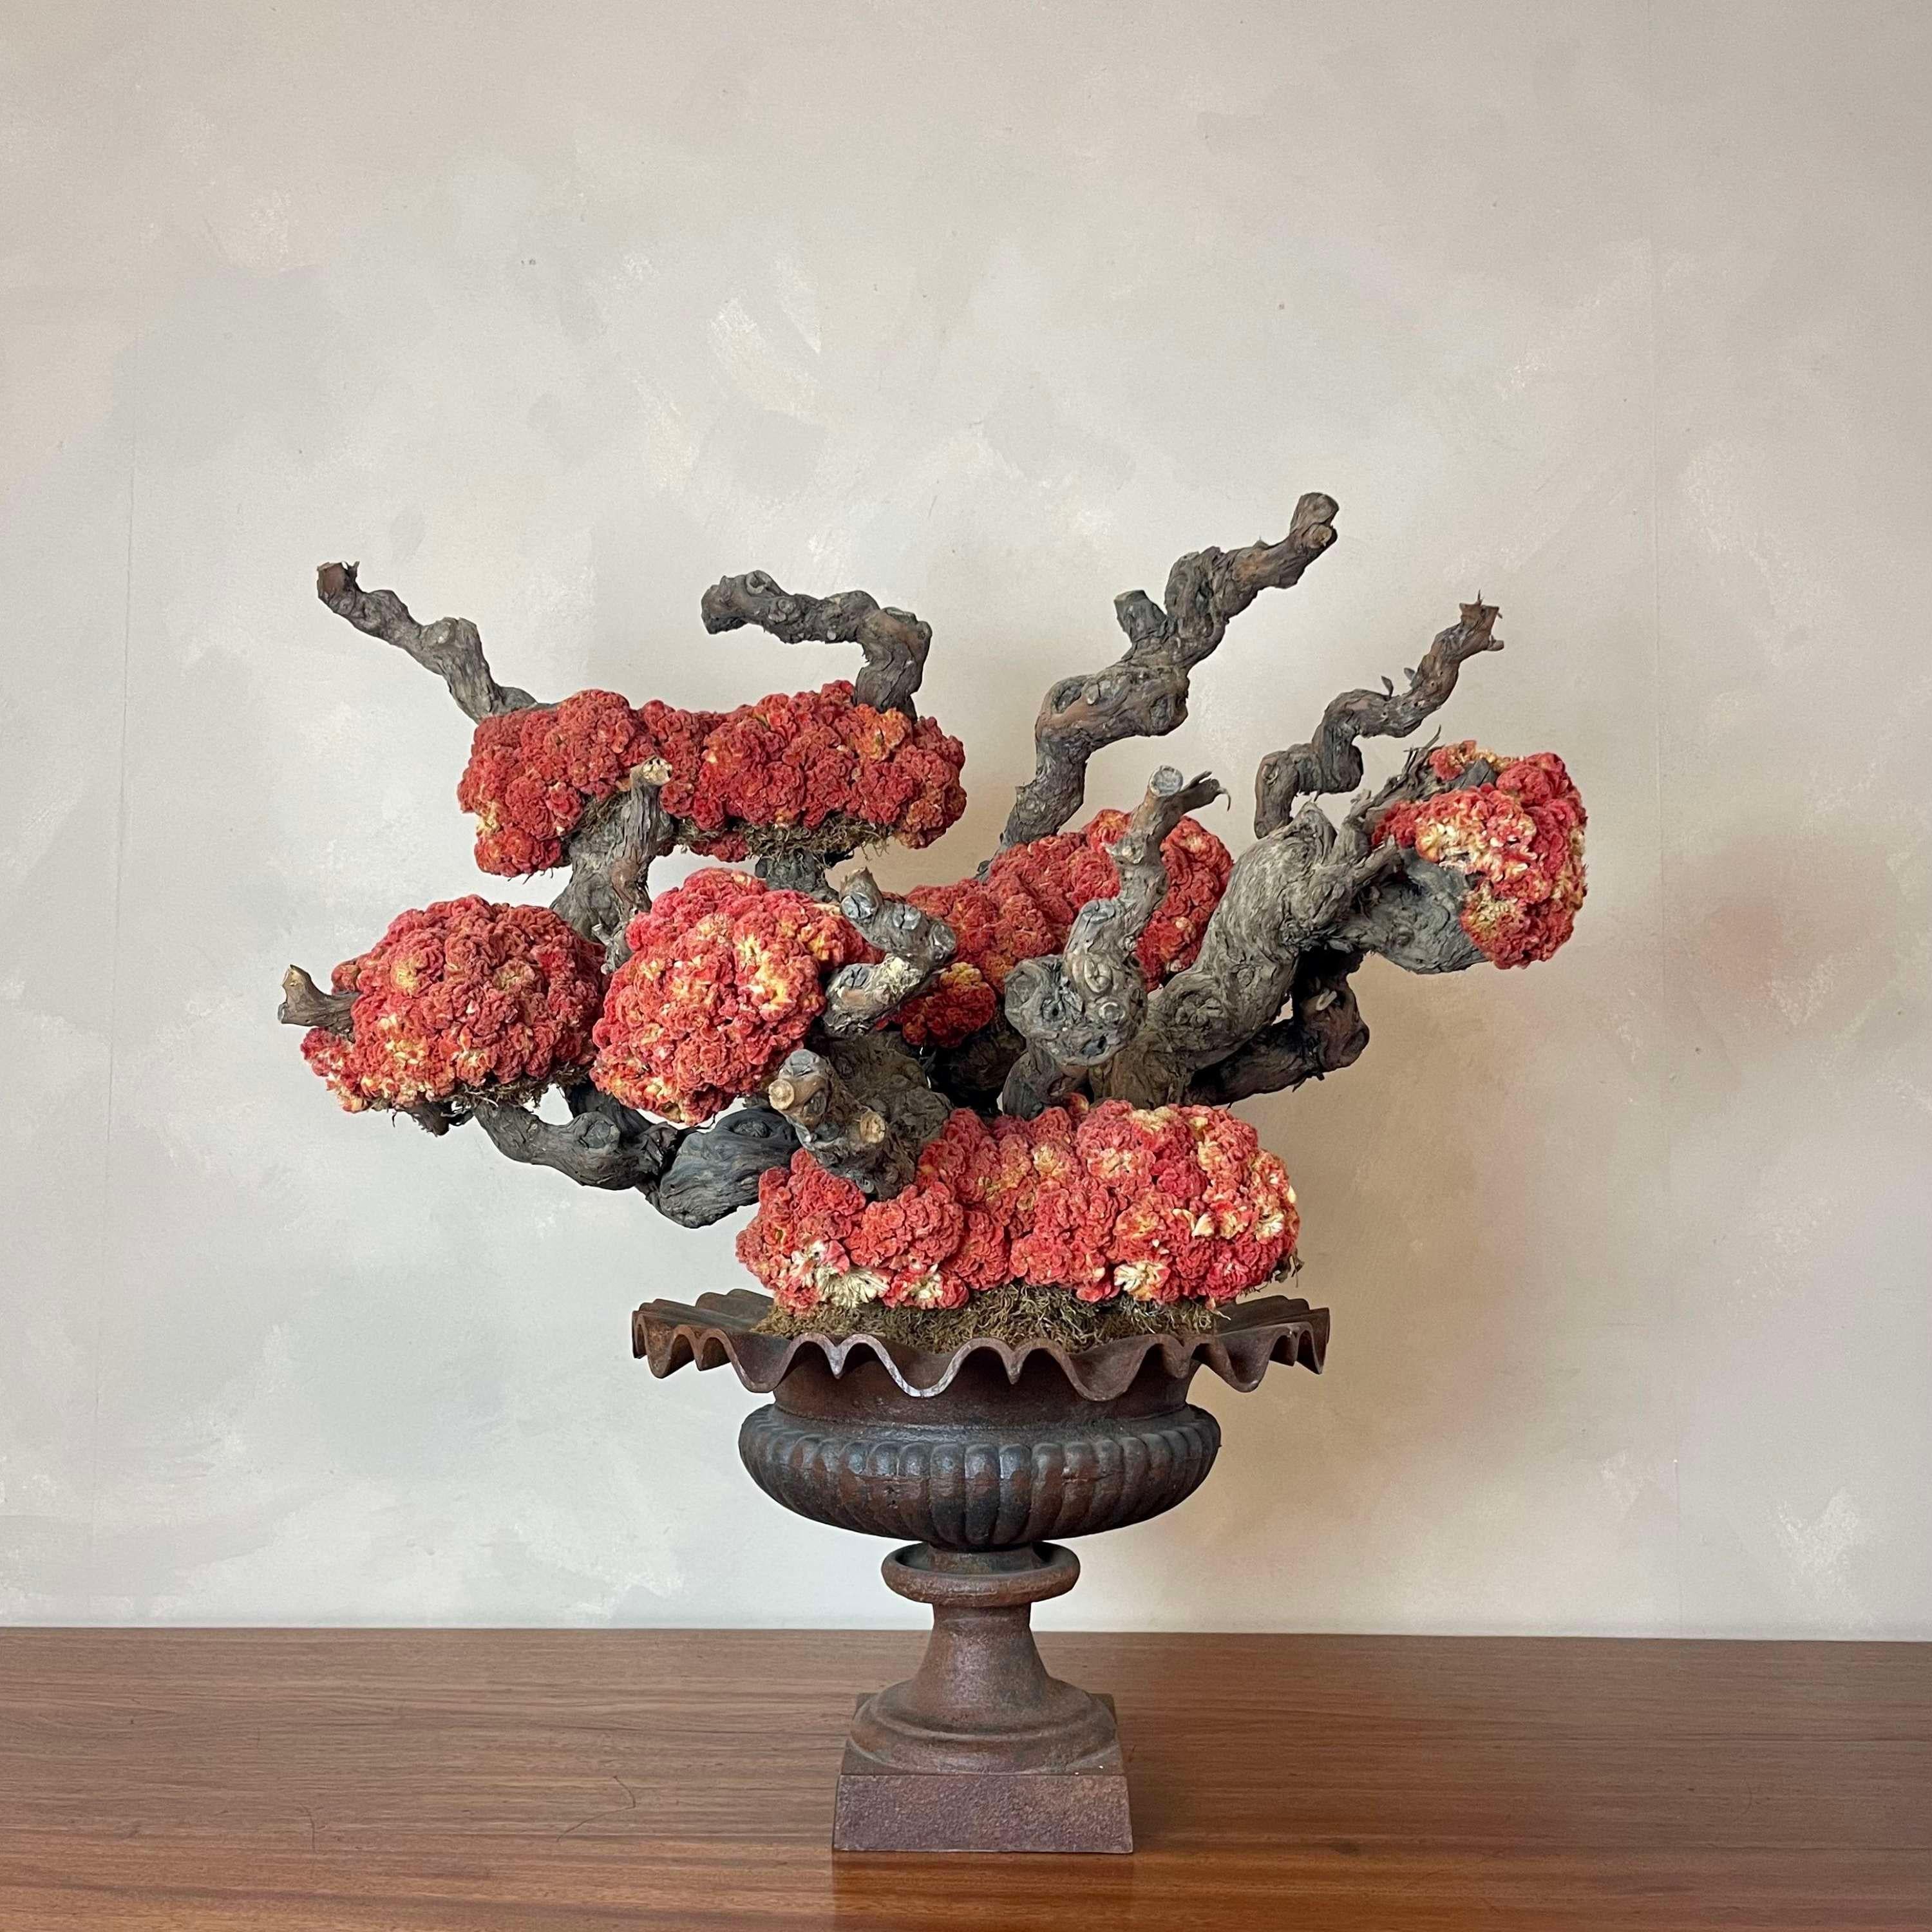 Large scale decorative centre piece.
Cast iron urn, filled with ornamental joined tree branches, adorned with striking pink Celosia Cristata ( Crested Cockscomb) reminiscent of coral. 
This piece has a true Bonsai feel and would make a great